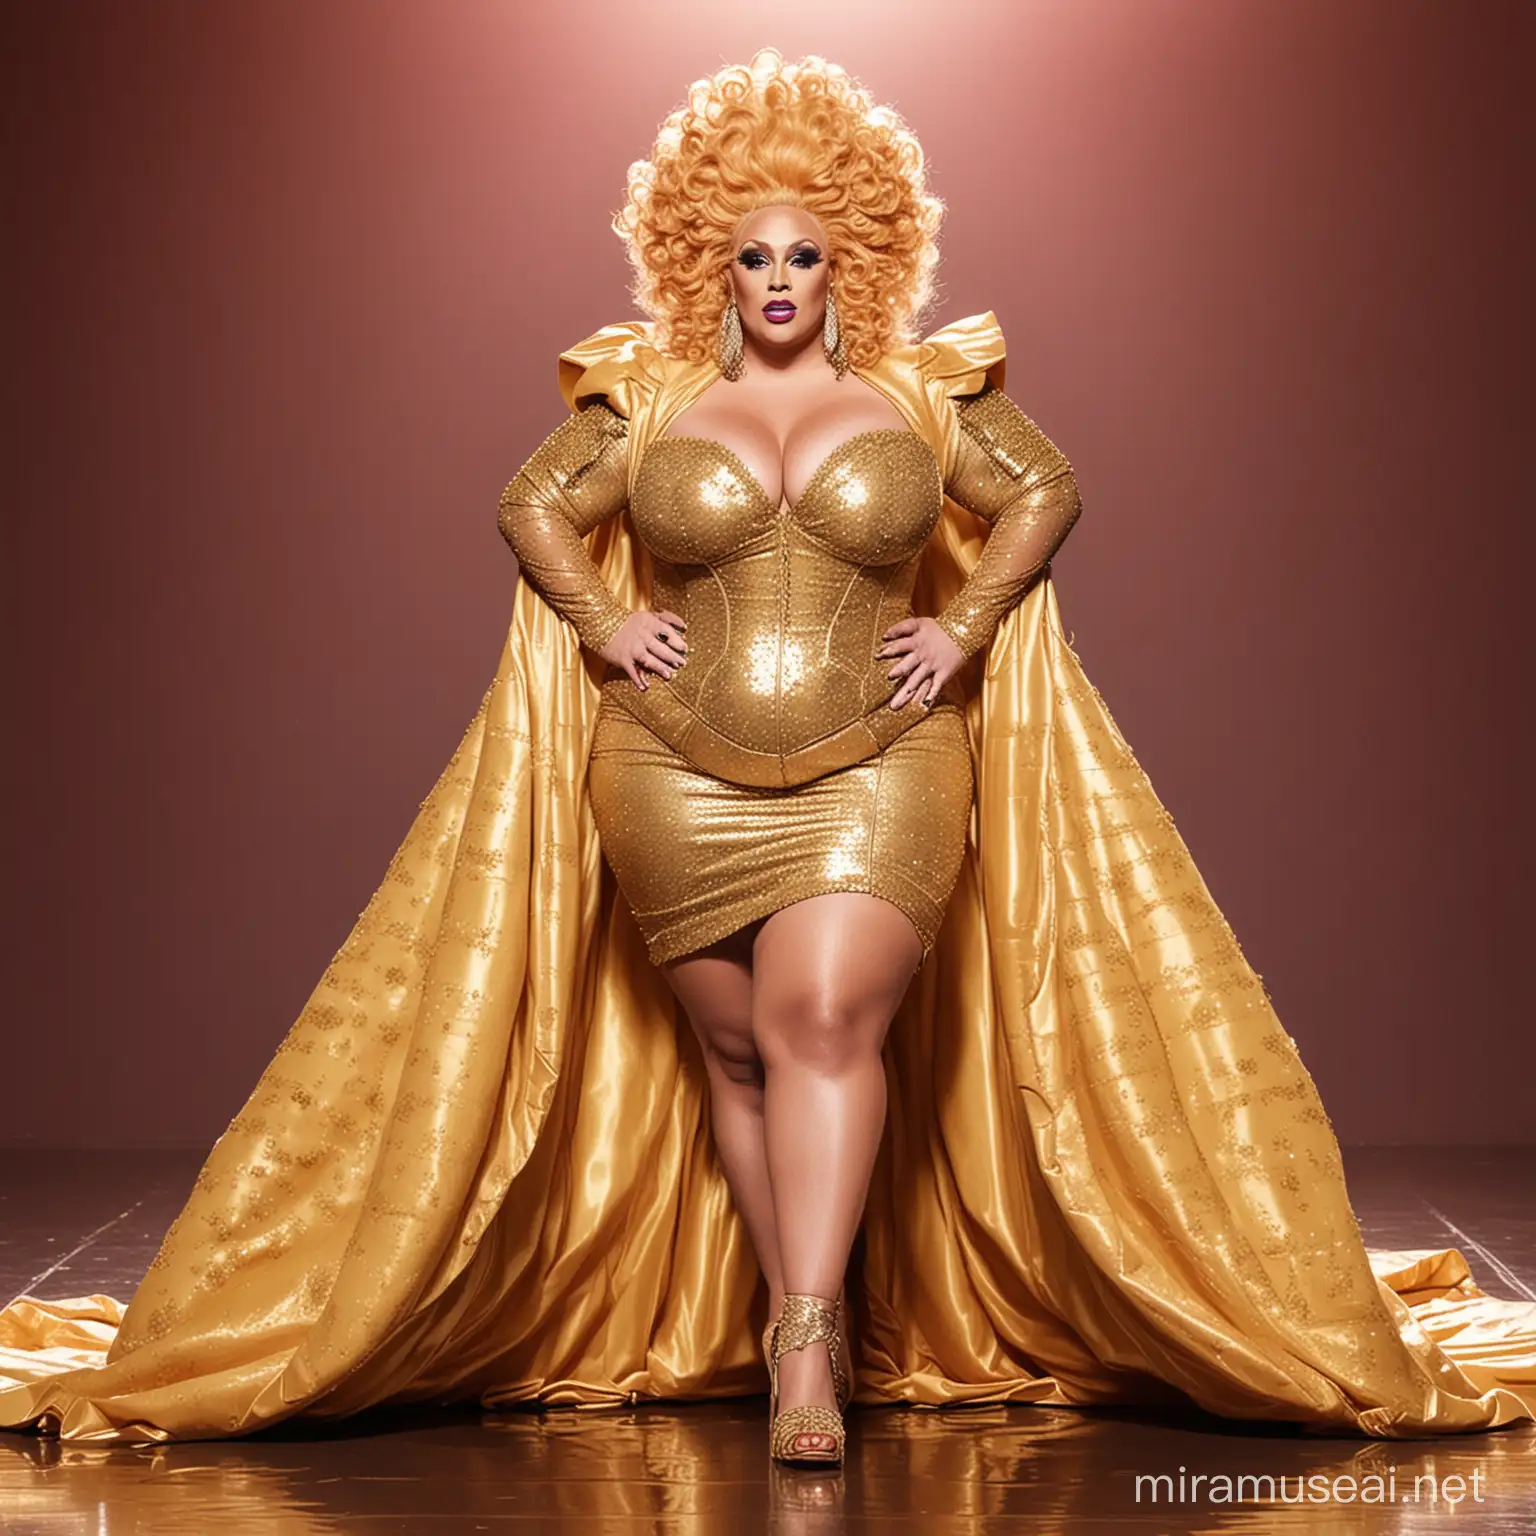 Drag Queen Fashion Dazzling Gold Outfit on RuPauls Runway